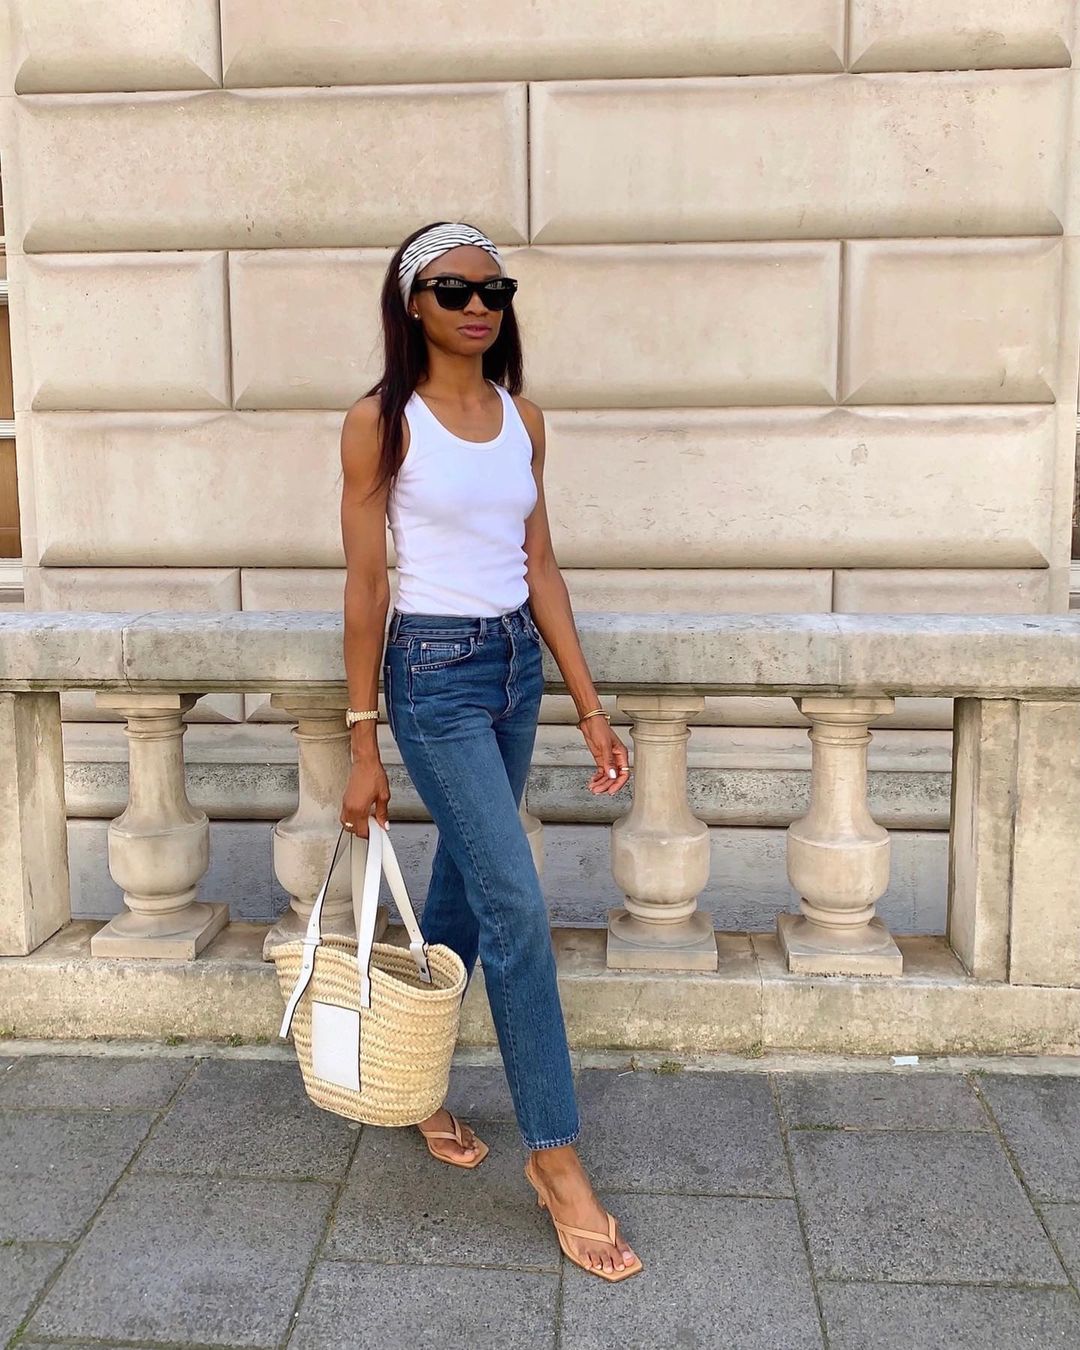 Summer skinny jeans outfits: @symphonyofsilk wears skinny jeans with a tank top and sandals